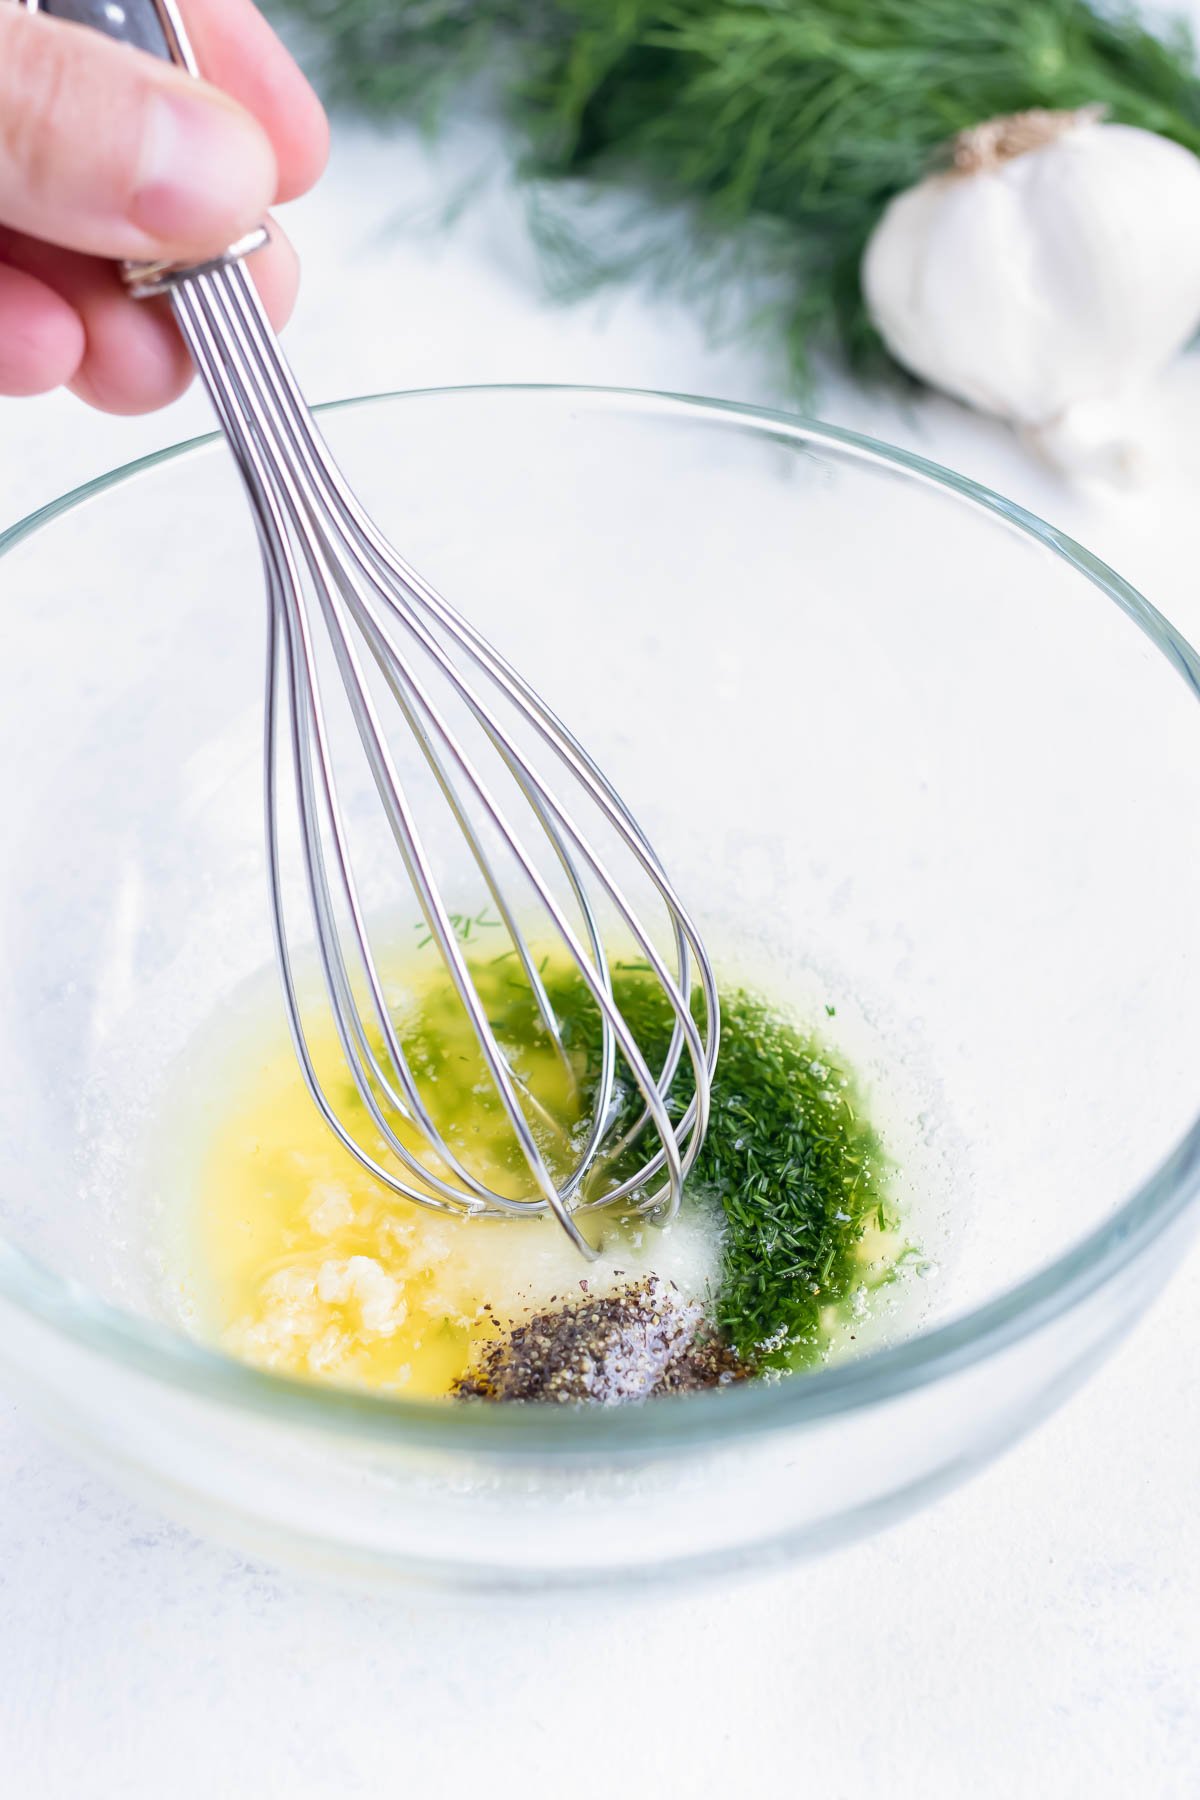 Melted butter, lemon juice, chopped dill, salt and pepper are combined in a bowl.